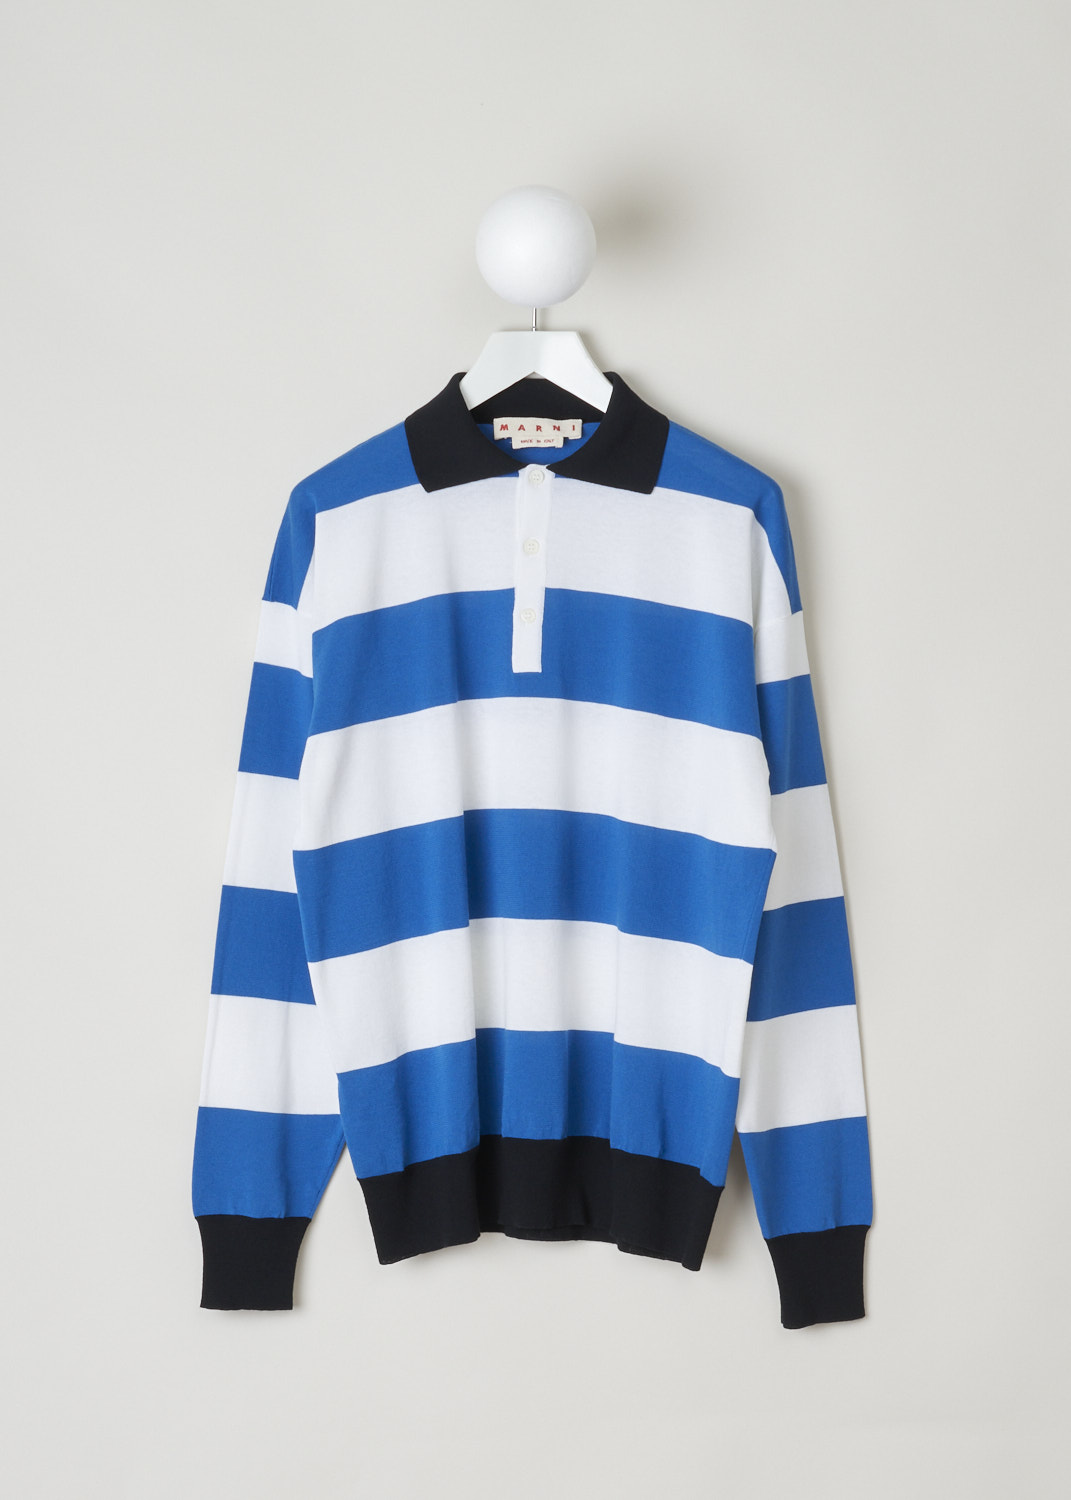 Marni, Horizontally striped long sleeve polo, POMD0029Q0_UFC912_MSB54, blue white, print, front, This long sleeve polo is designed with an oversized fit in mind and comes adorned with lovely horizontal stripes in blue and white. The pointed collar, hem and the cuffs are all coloured to a darker shade of blue.  